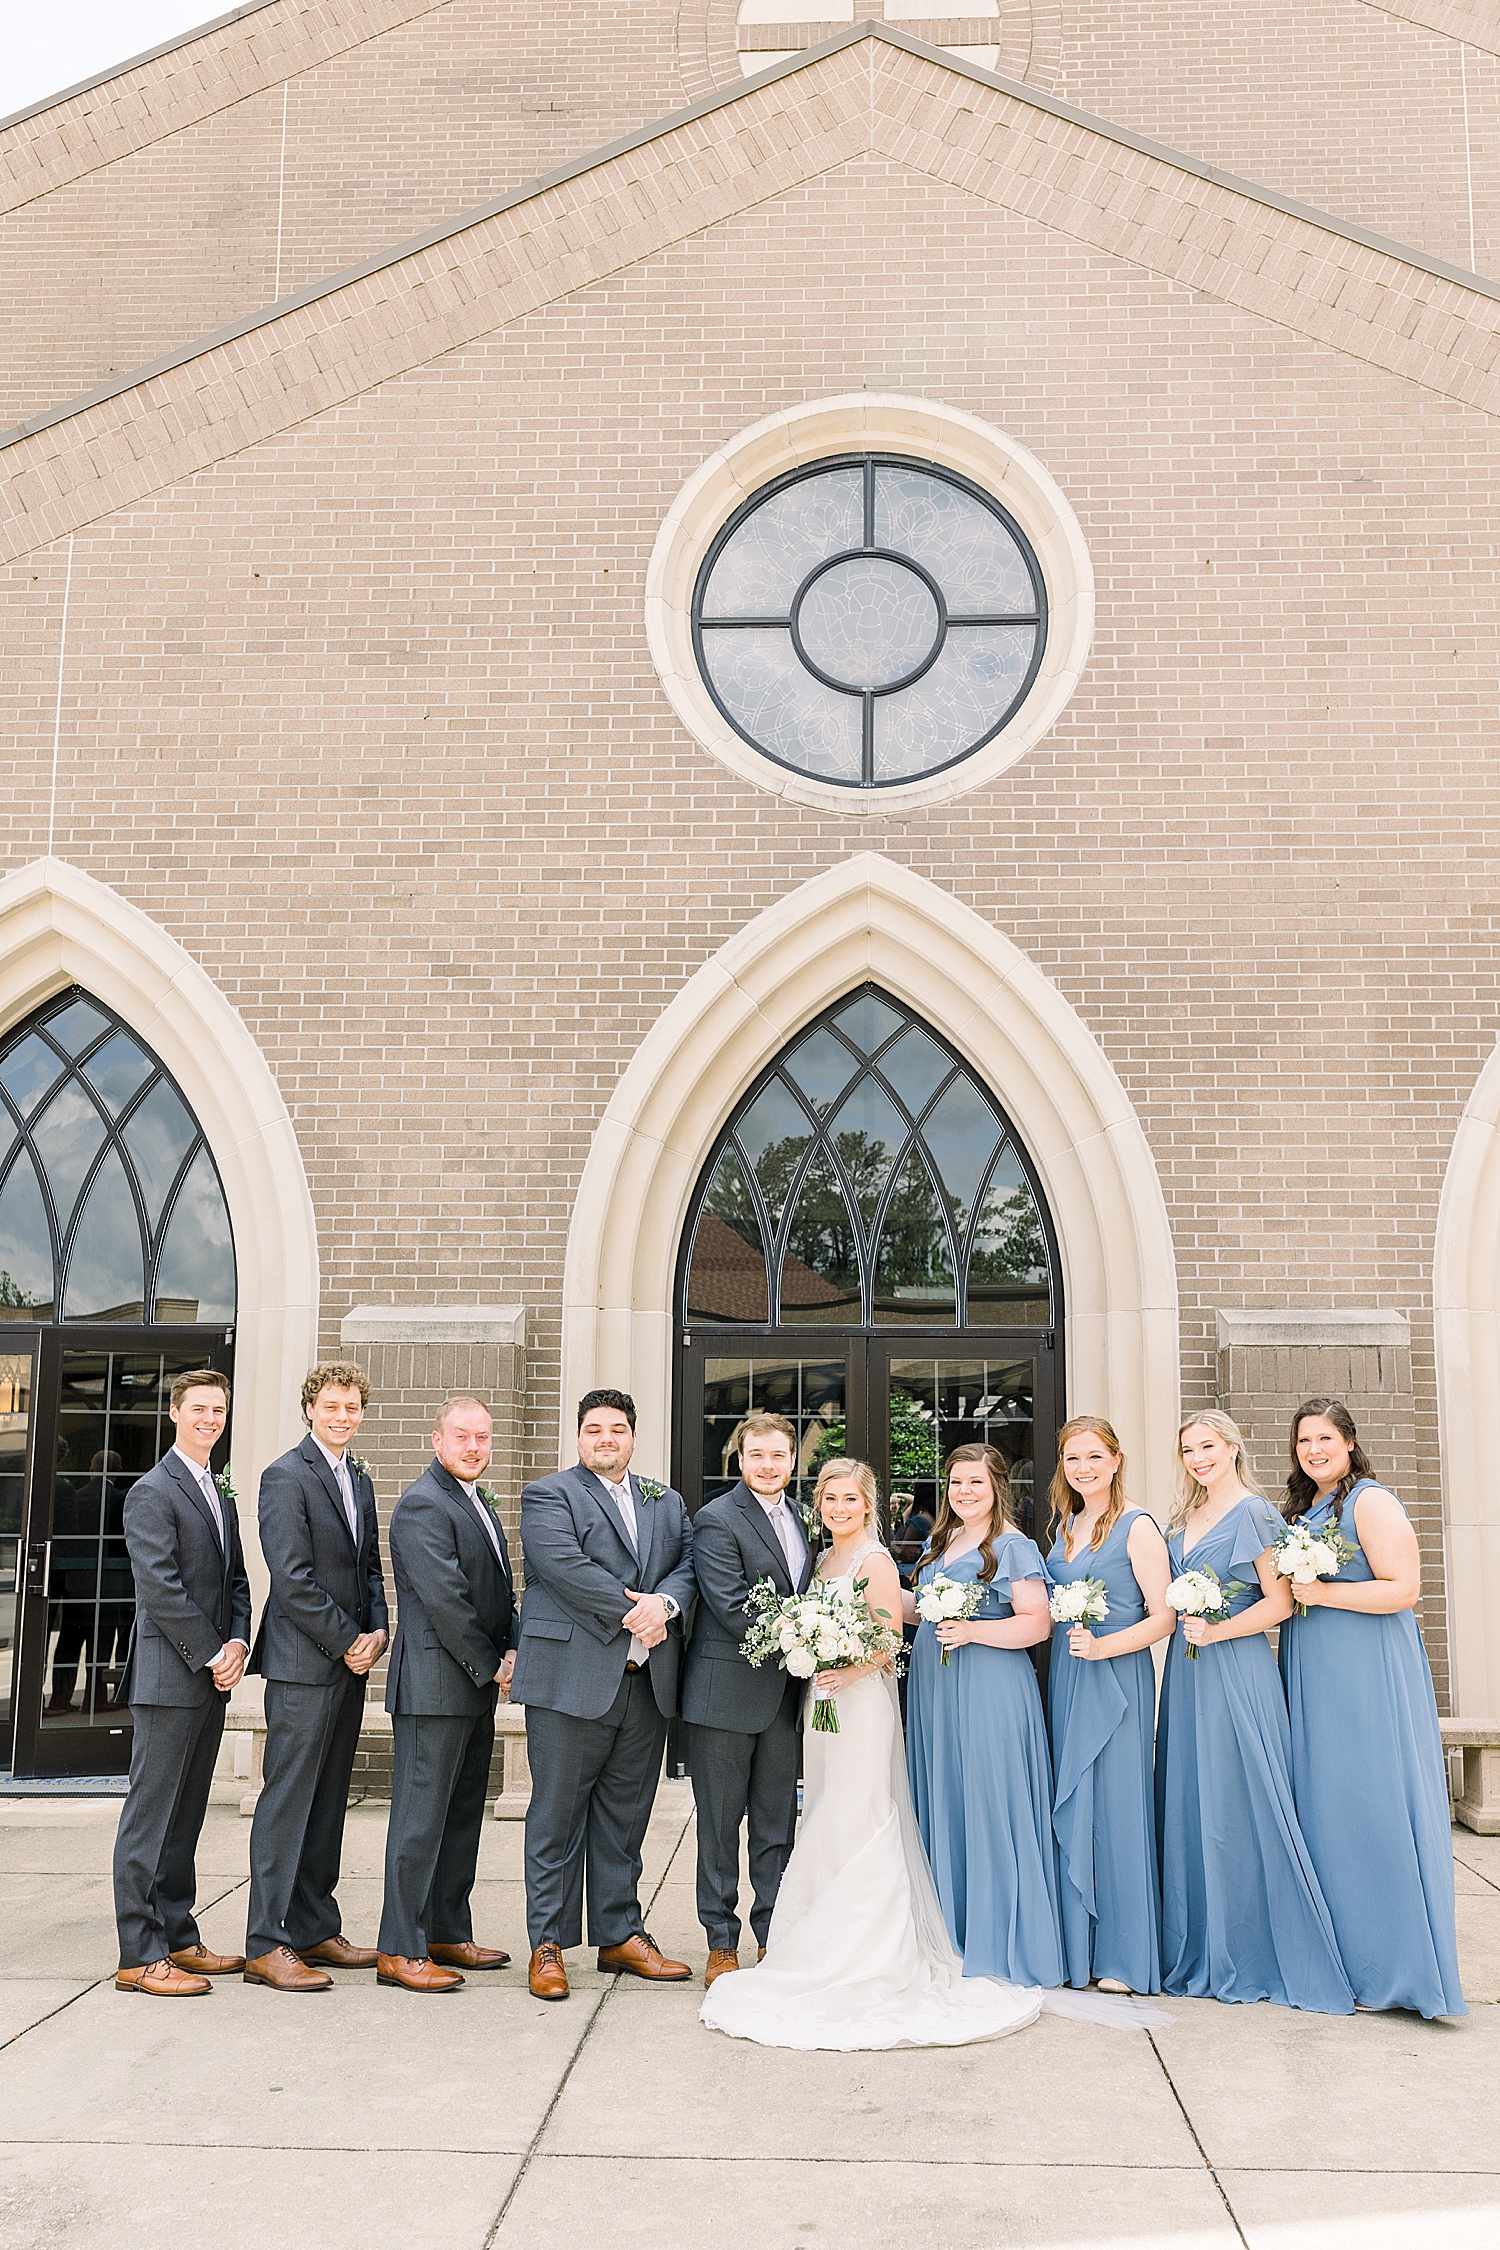 bride and groom pose with bridal party in blue gowns